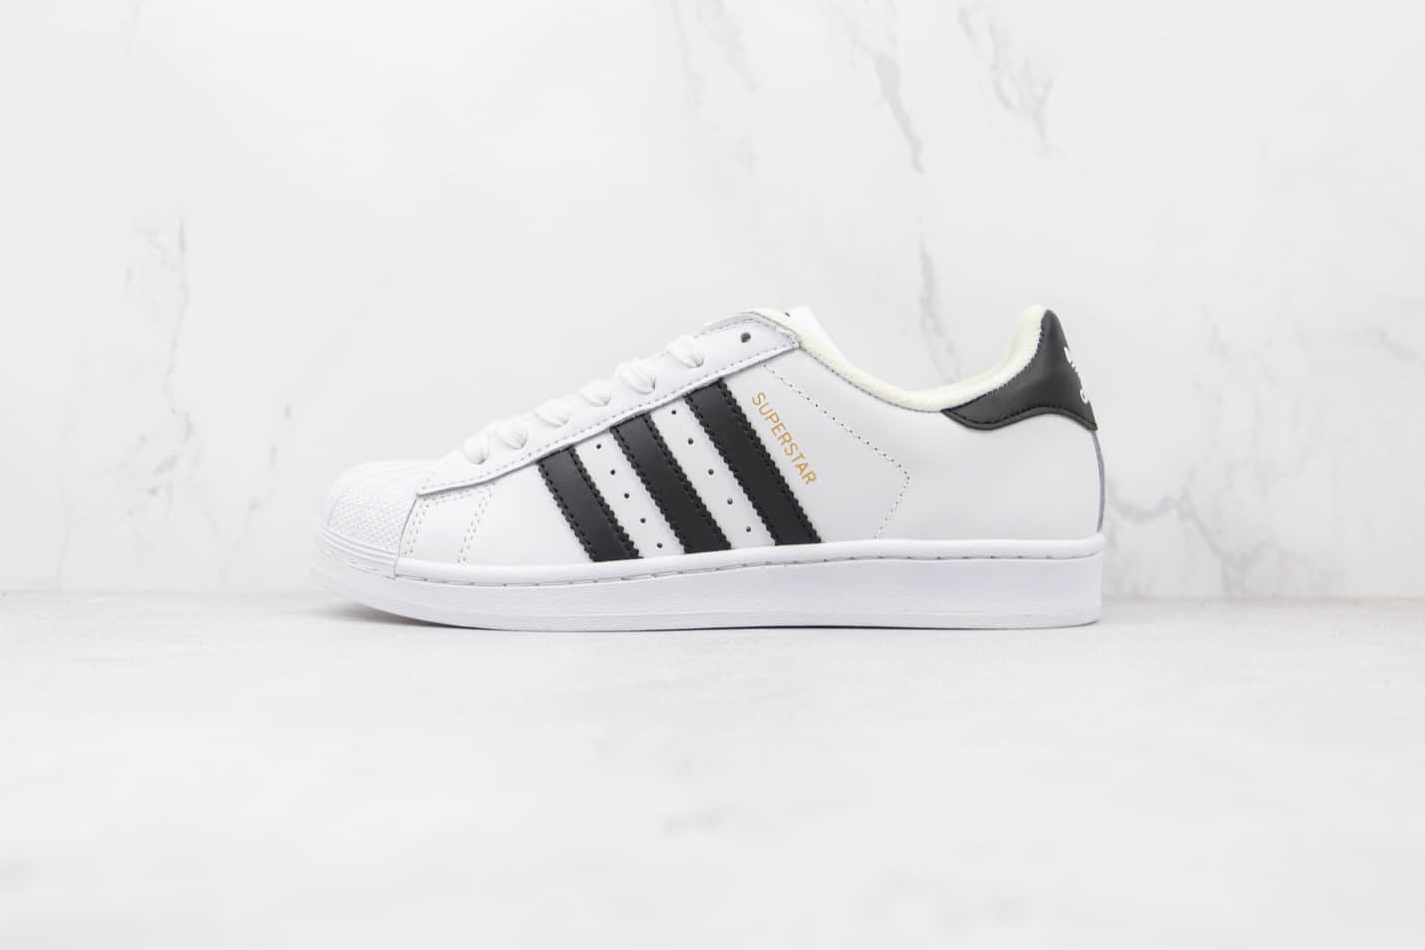 Adidas Superstar White Black C77124 - Classic Sneakers for Any Style